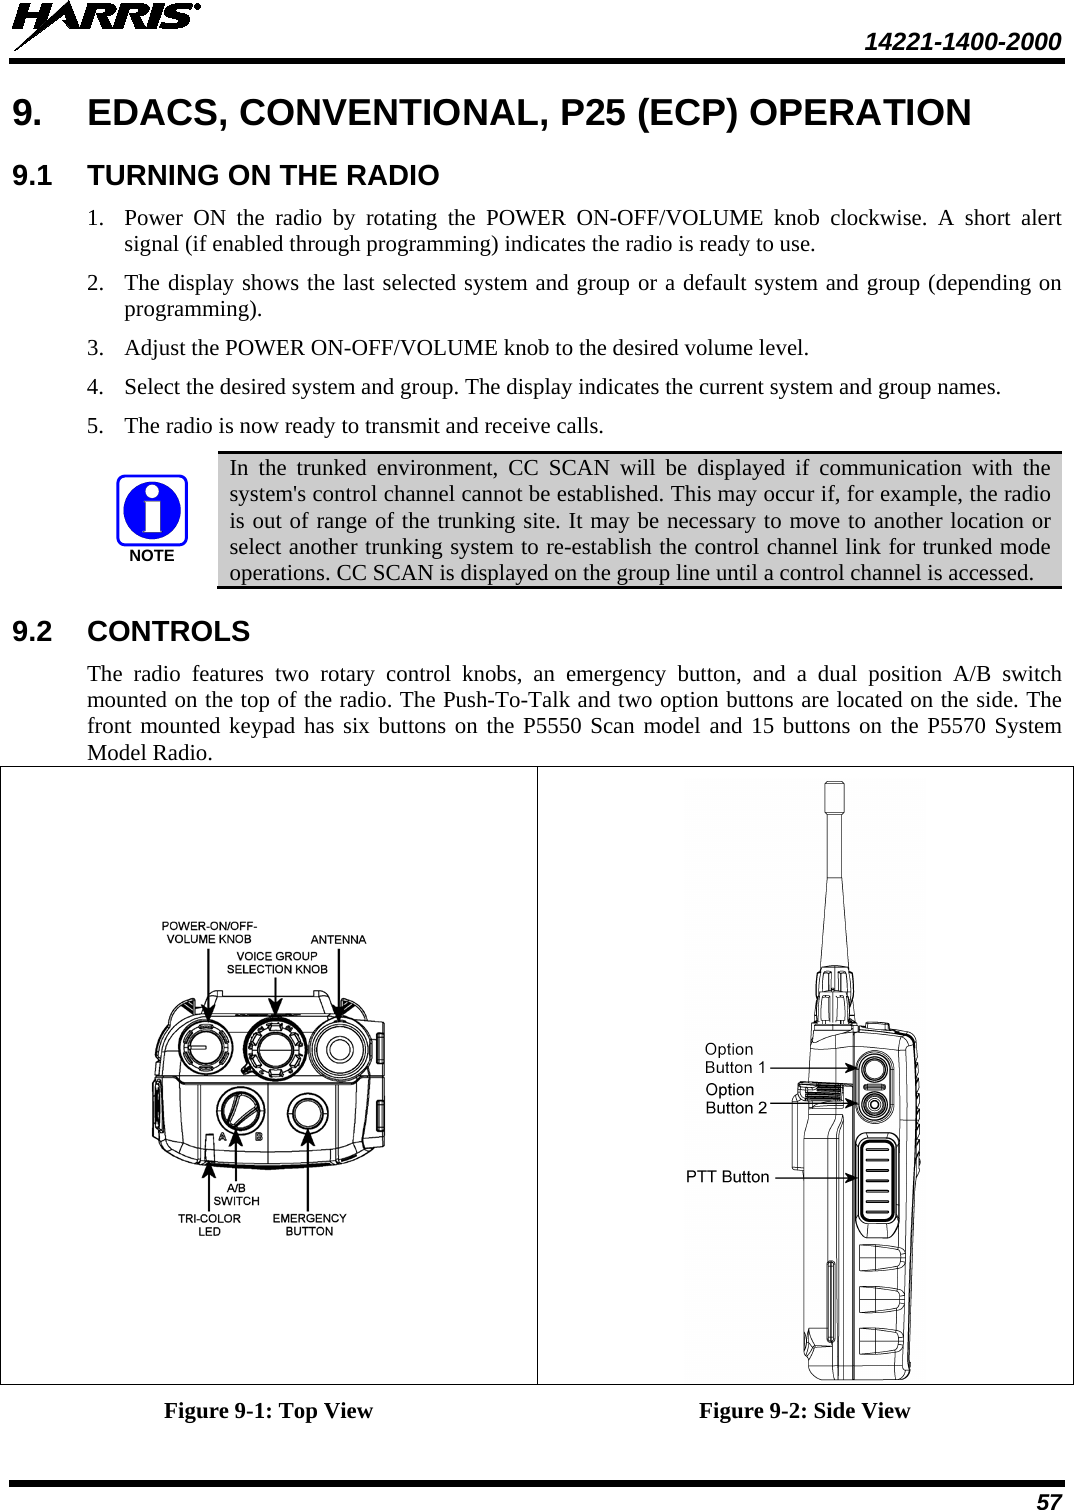  14221-1400-2000  57 9. EDACS, CONVENTIONAL, P25 (ECP) OPERATION 9.1 TURNING ON THE RADIO 1. Power ON the radio by rotating the POWER ON-OFF/VOLUME knob clockwise. A short alert signal (if enabled through programming) indicates the radio is ready to use.  2. The display shows the last selected system and group or a default system and group (depending on programming).  3. Adjust the POWER ON-OFF/VOLUME knob to the desired volume level.  4. Select the desired system and group. The display indicates the current system and group names.  5. The radio is now ready to transmit and receive calls. NOTE In the trunked environment, CC SCAN will be displayed if communication with the system&apos;s control channel cannot be established. This may occur if, for example, the radio is out of range of the trunking site. It may be necessary to move to another location or select another trunking system to re-establish the control channel link for trunked mode operations. CC SCAN is displayed on the group line until a control channel is accessed. 9.2 CONTROLS The radio features two rotary control knobs,  an emergency button,  and a dual position A/B switch mounted on the top of the radio. The Push-To-Talk and two option buttons are located on the side. The front mounted keypad has six buttons on the P5550 Scan model and 15 buttons on the P5570 System Model Radio.   Figure 9-1: Top View Figure 9-2: Side View 